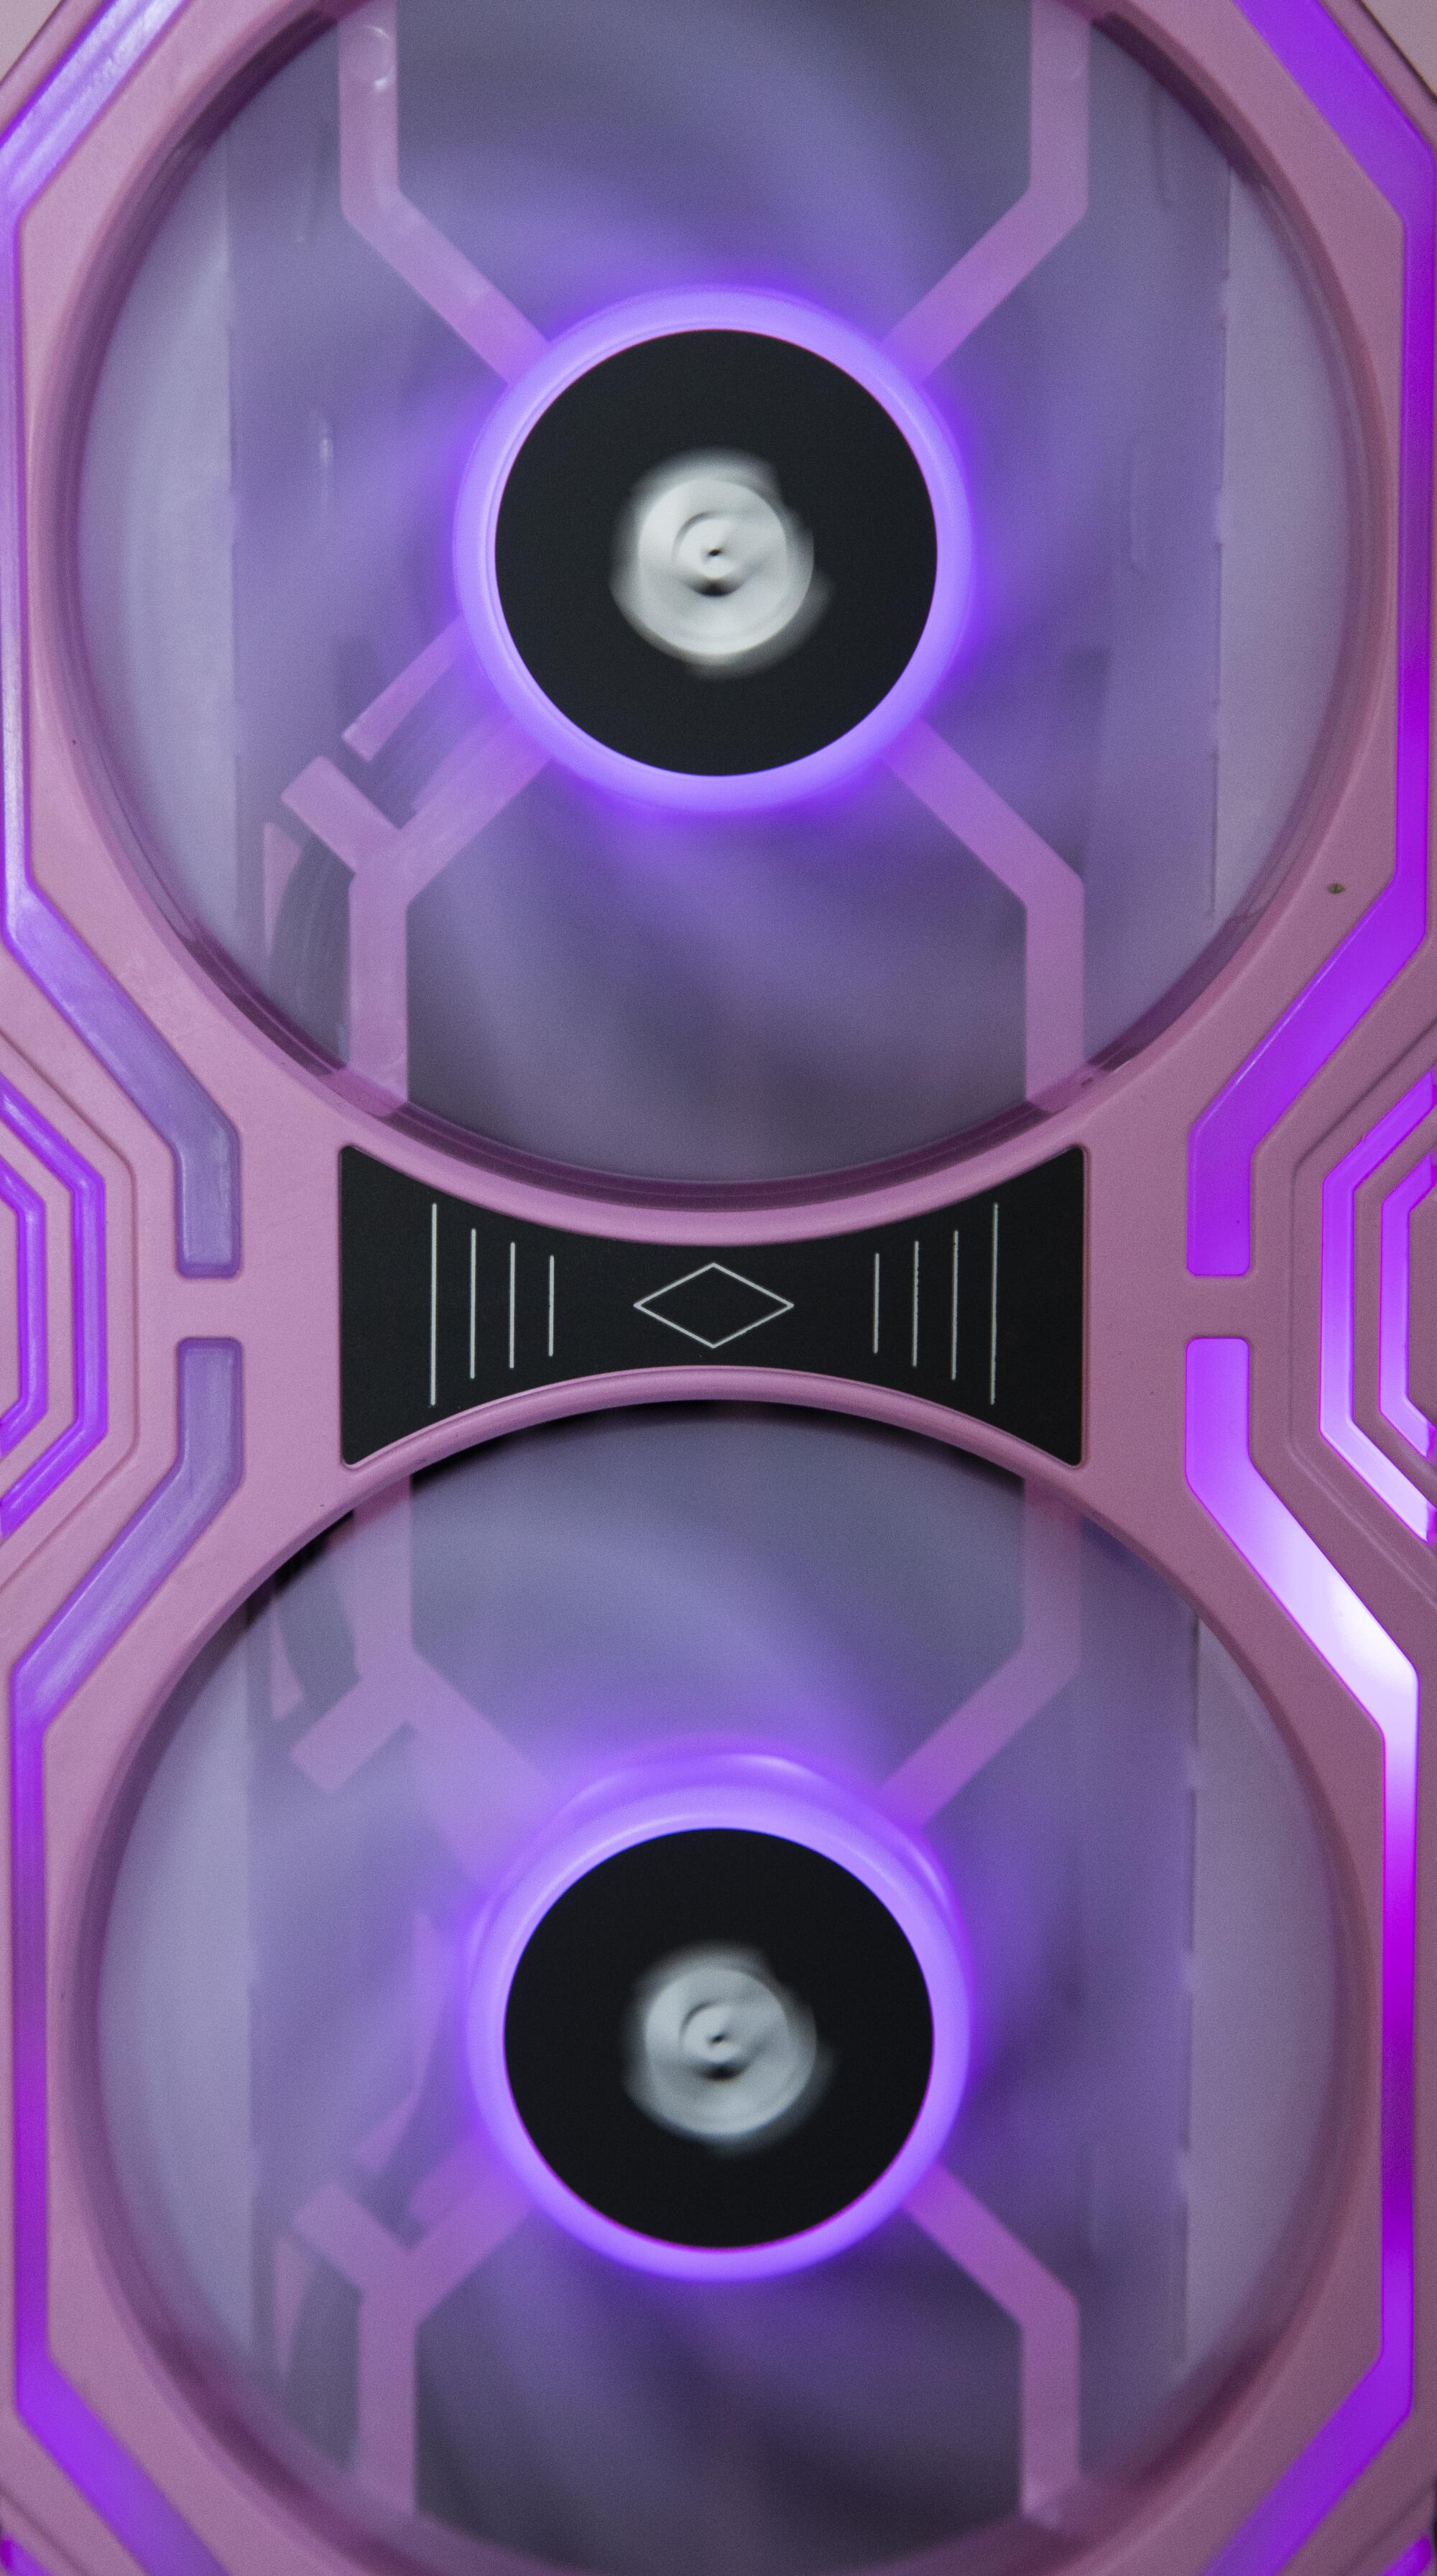 An air filter system made with computer fans and purple lights.